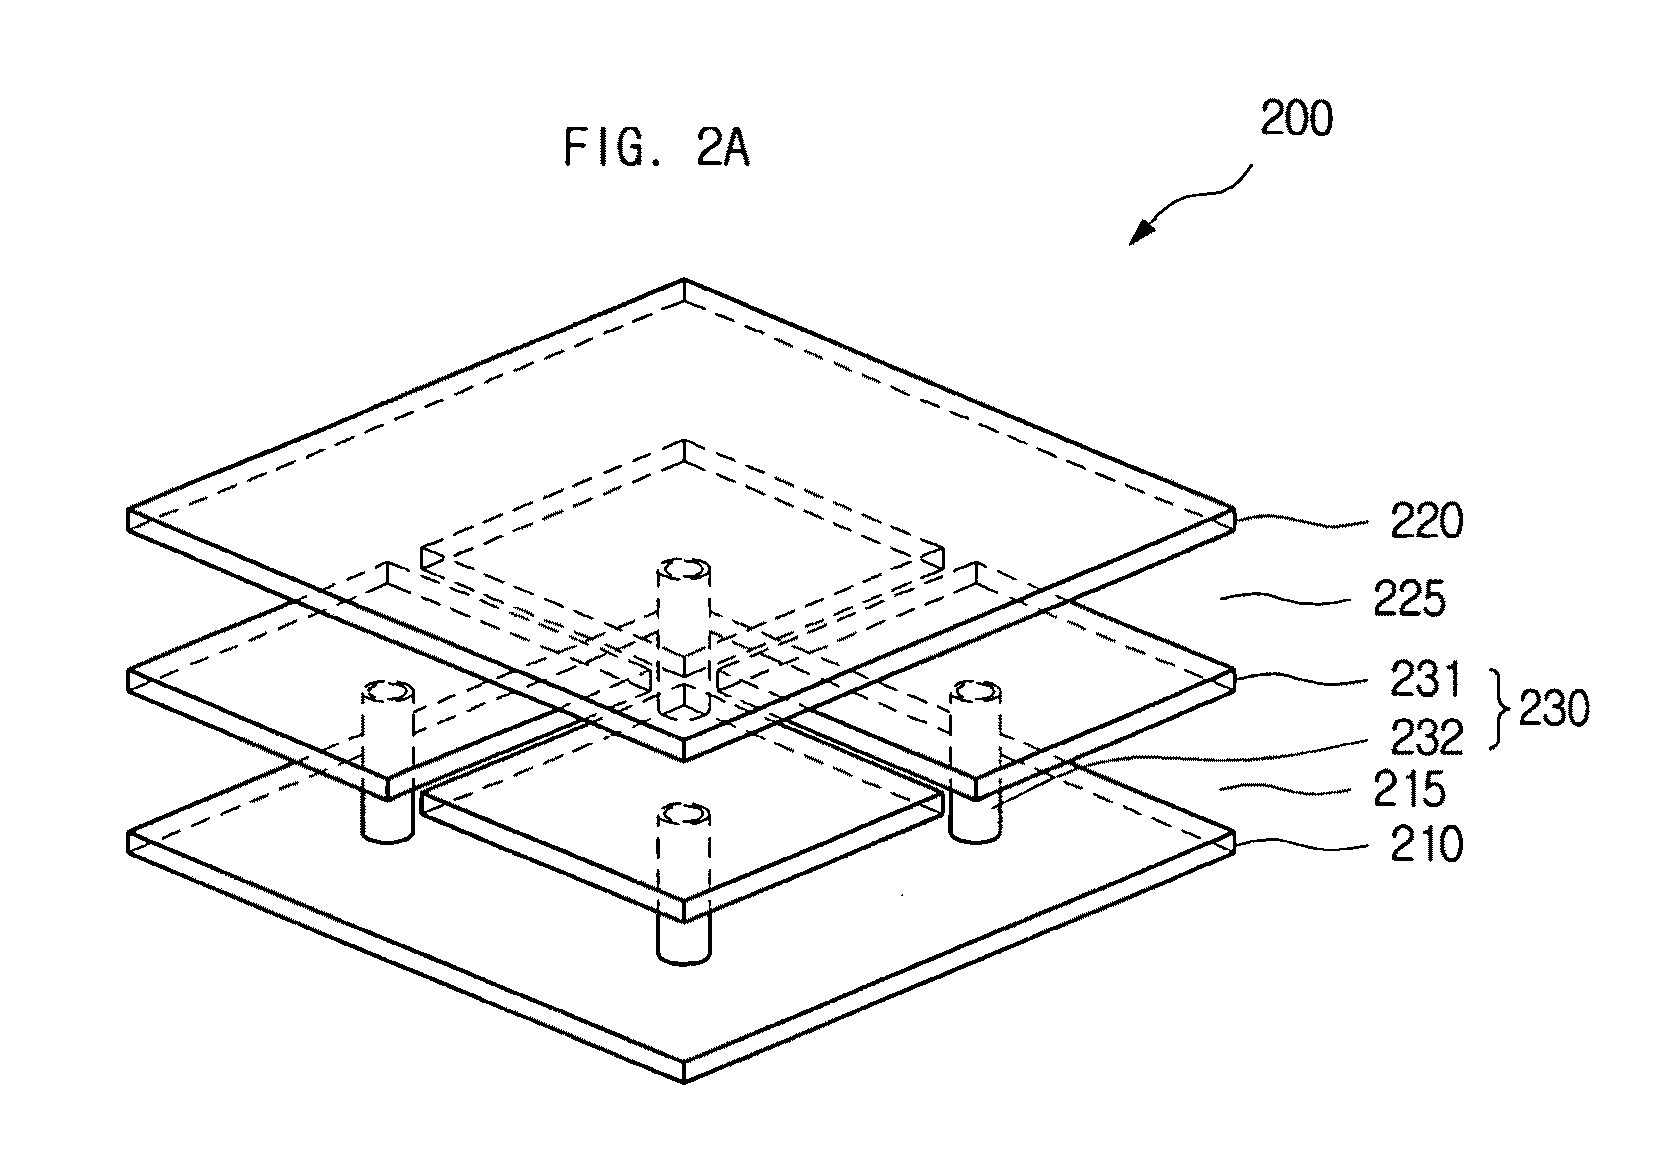 Electromagnetic interference noise reduction board using electromagnetic bandgap structure